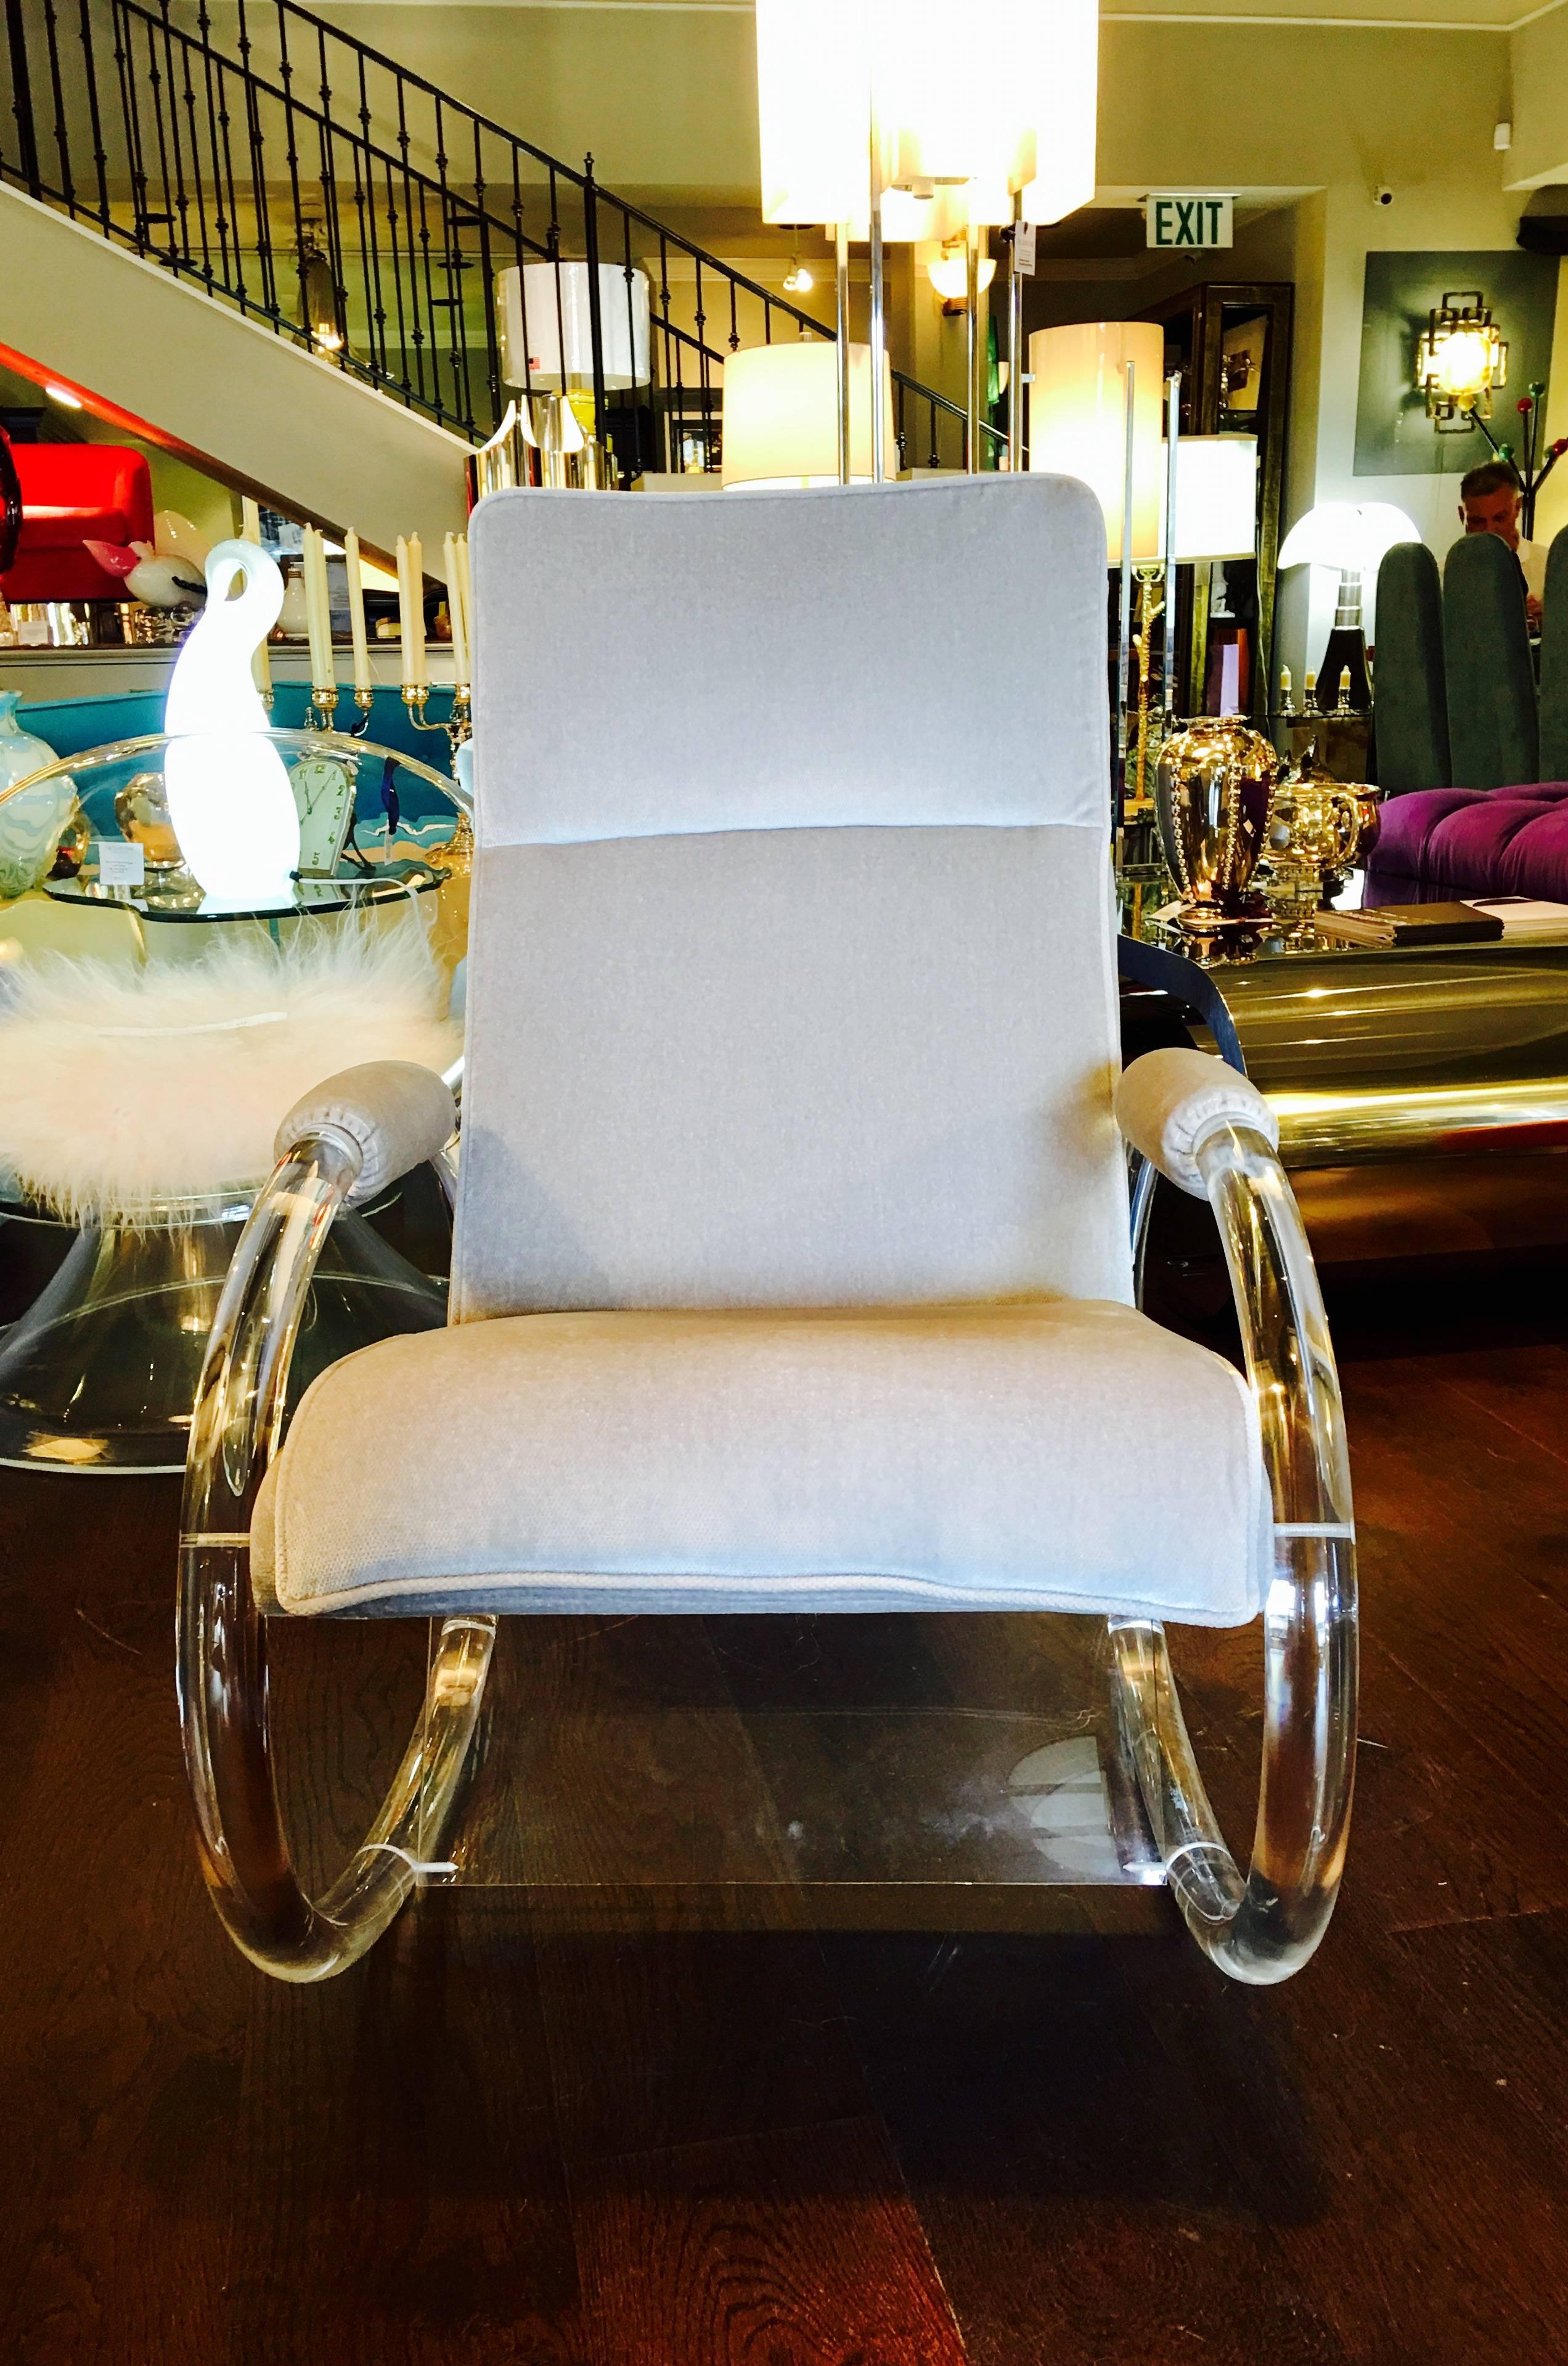 Lucite rocking chair by designer Charles Hollis Jones, upholstered in a light grey fabric with sculptural oval arms and Lucite base.